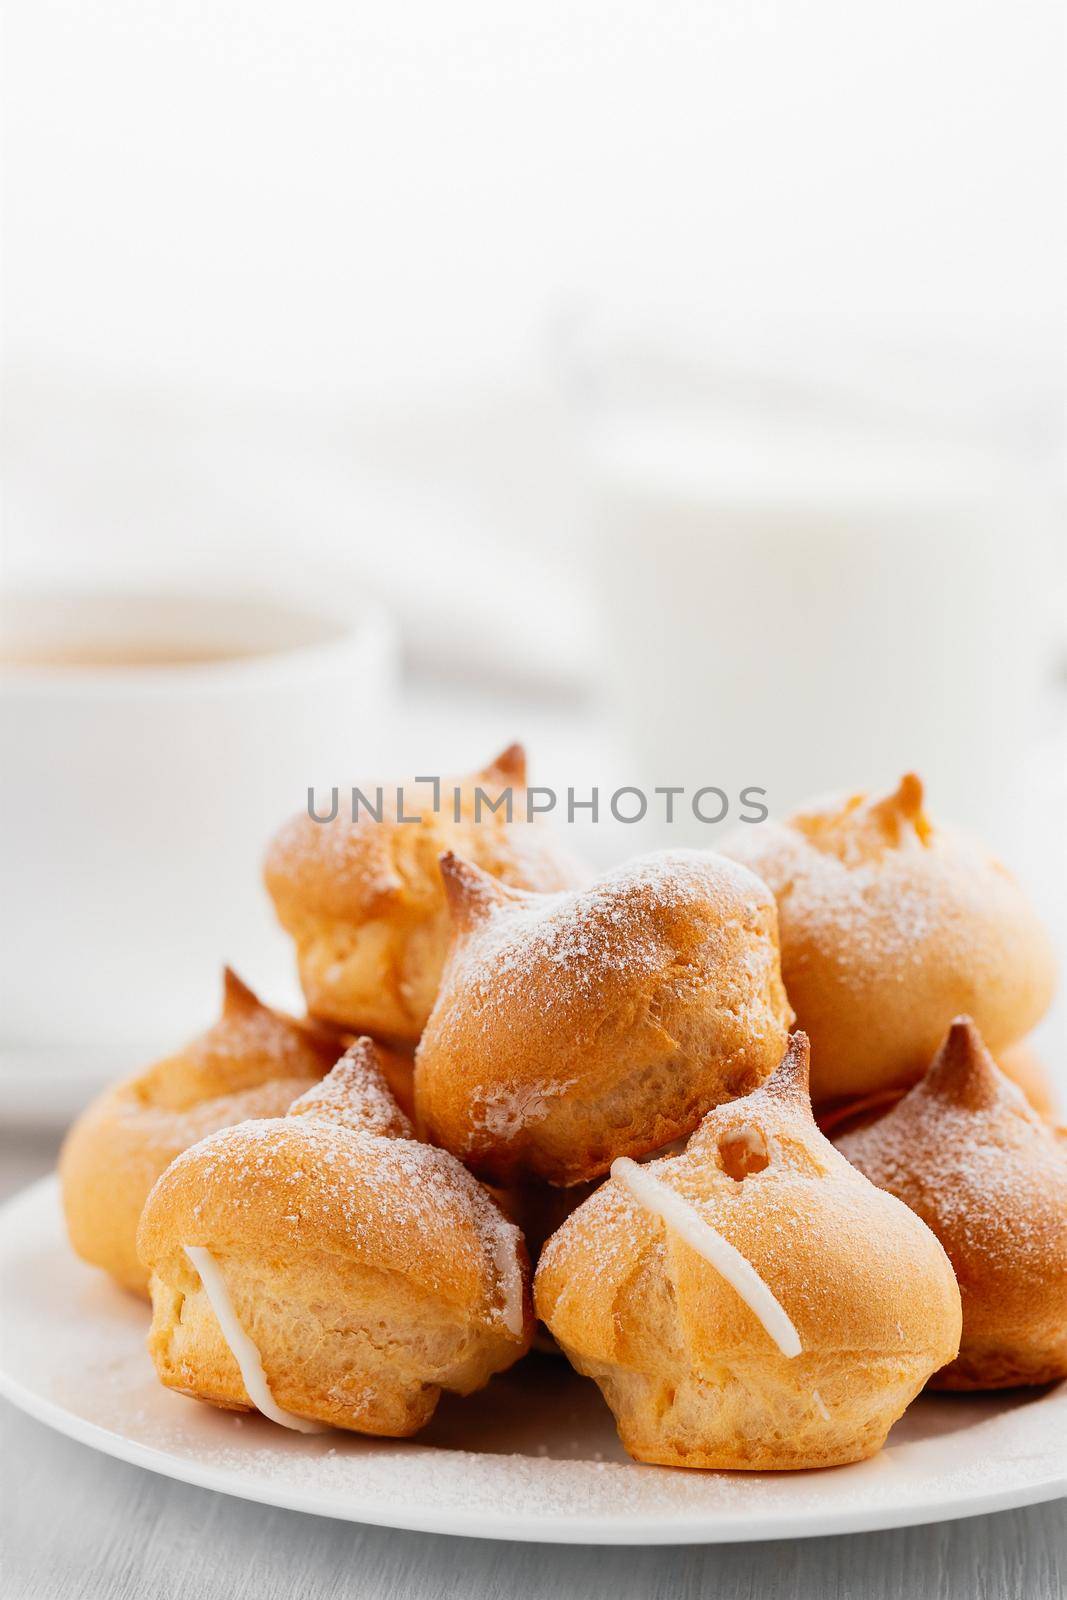 Morning coffee with cakes. Profiteroles, coffee, cream on a white wooden table. Vertical image by galsand